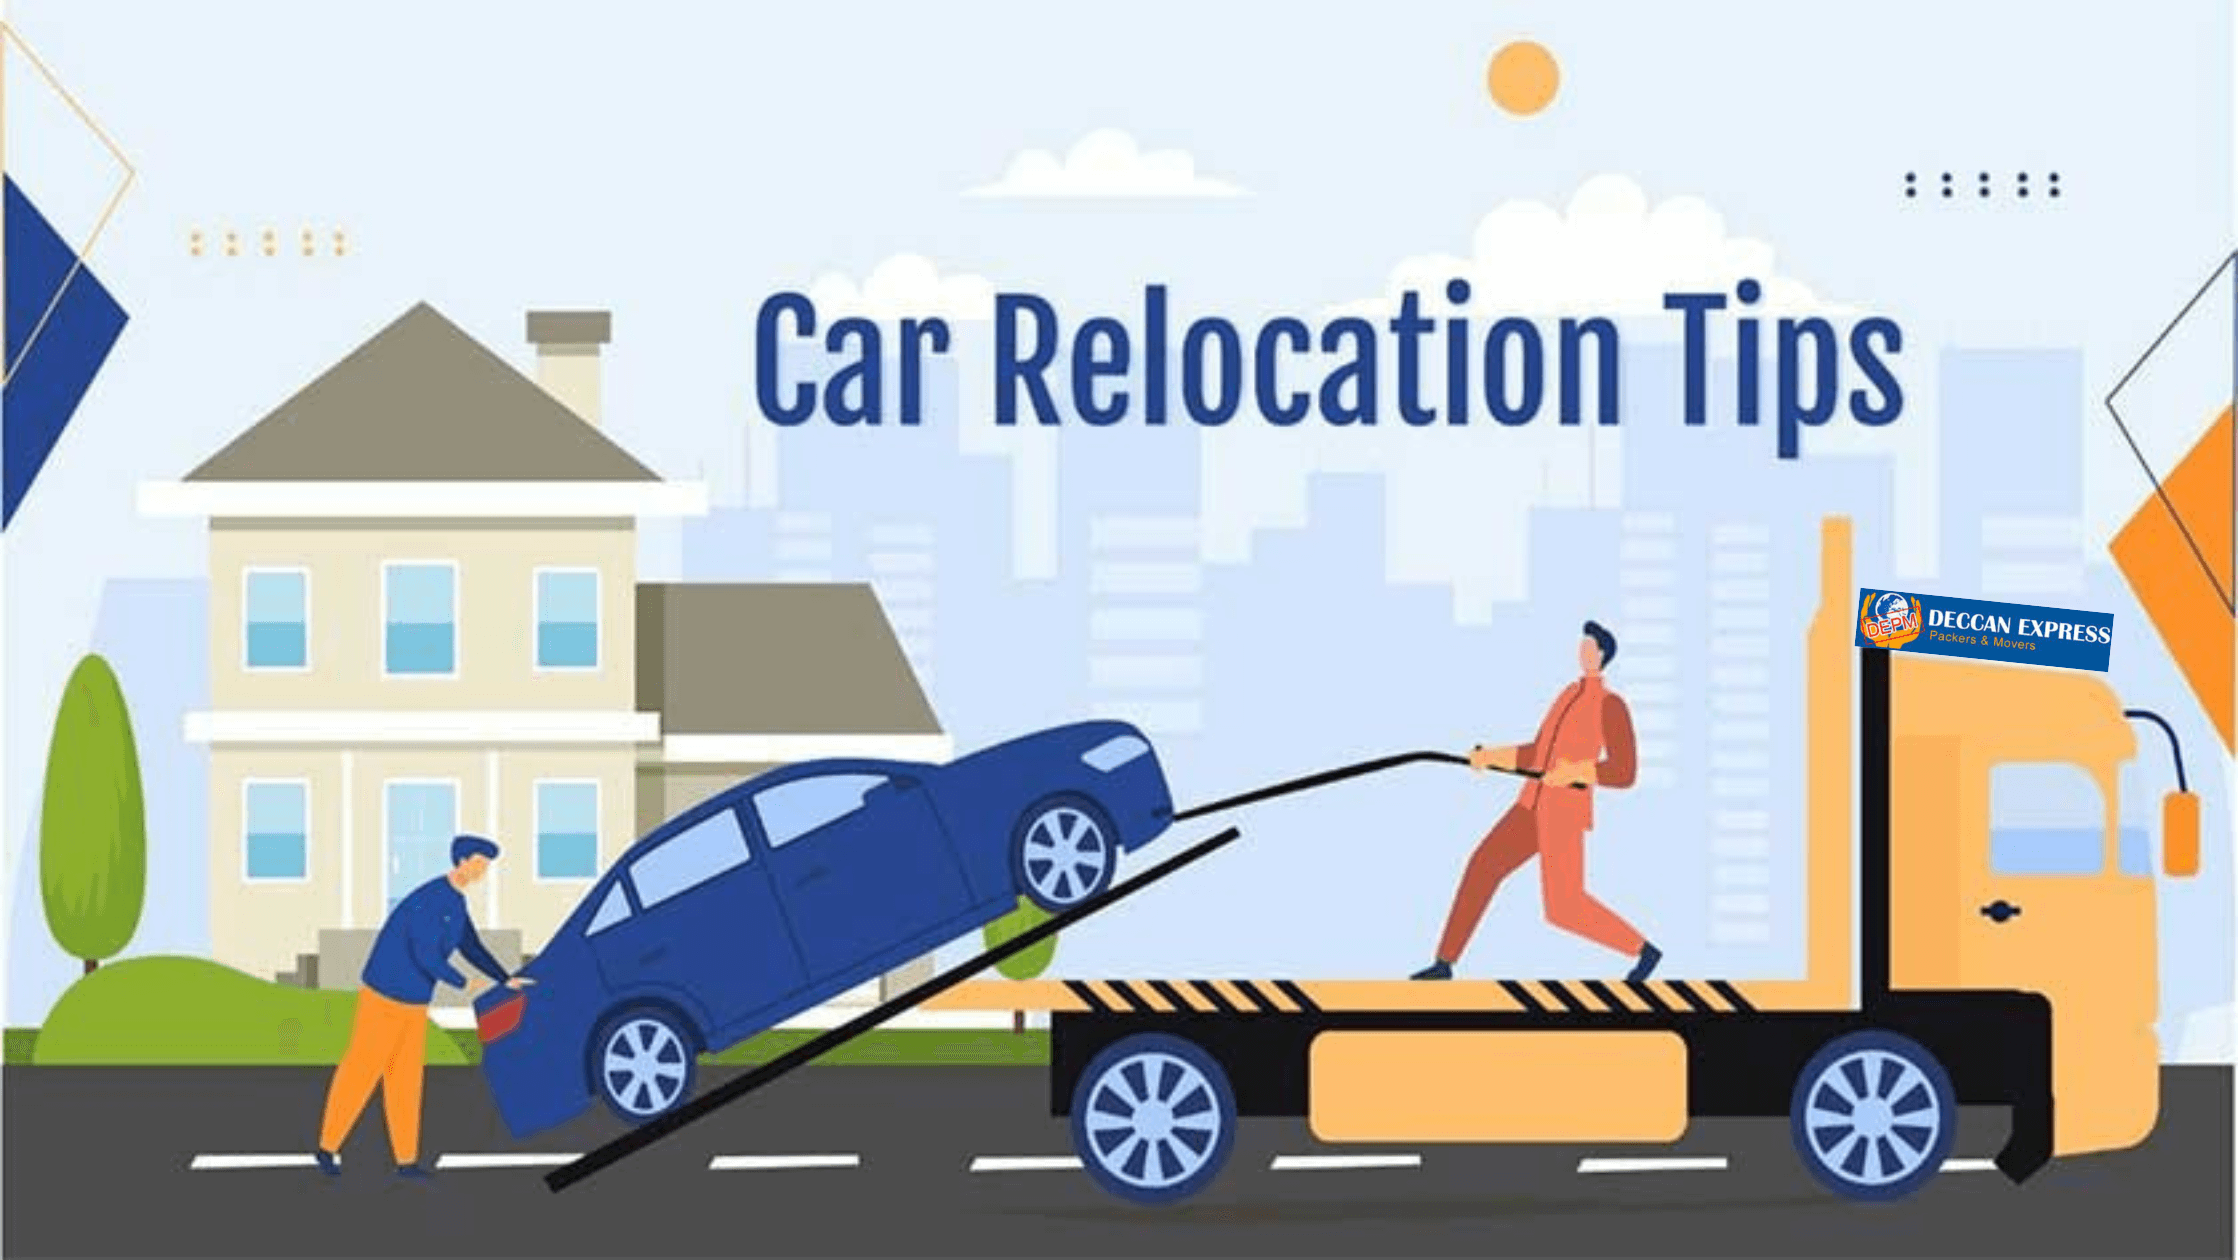 Tips to Maintain Your Car When Relocating to a New Climate